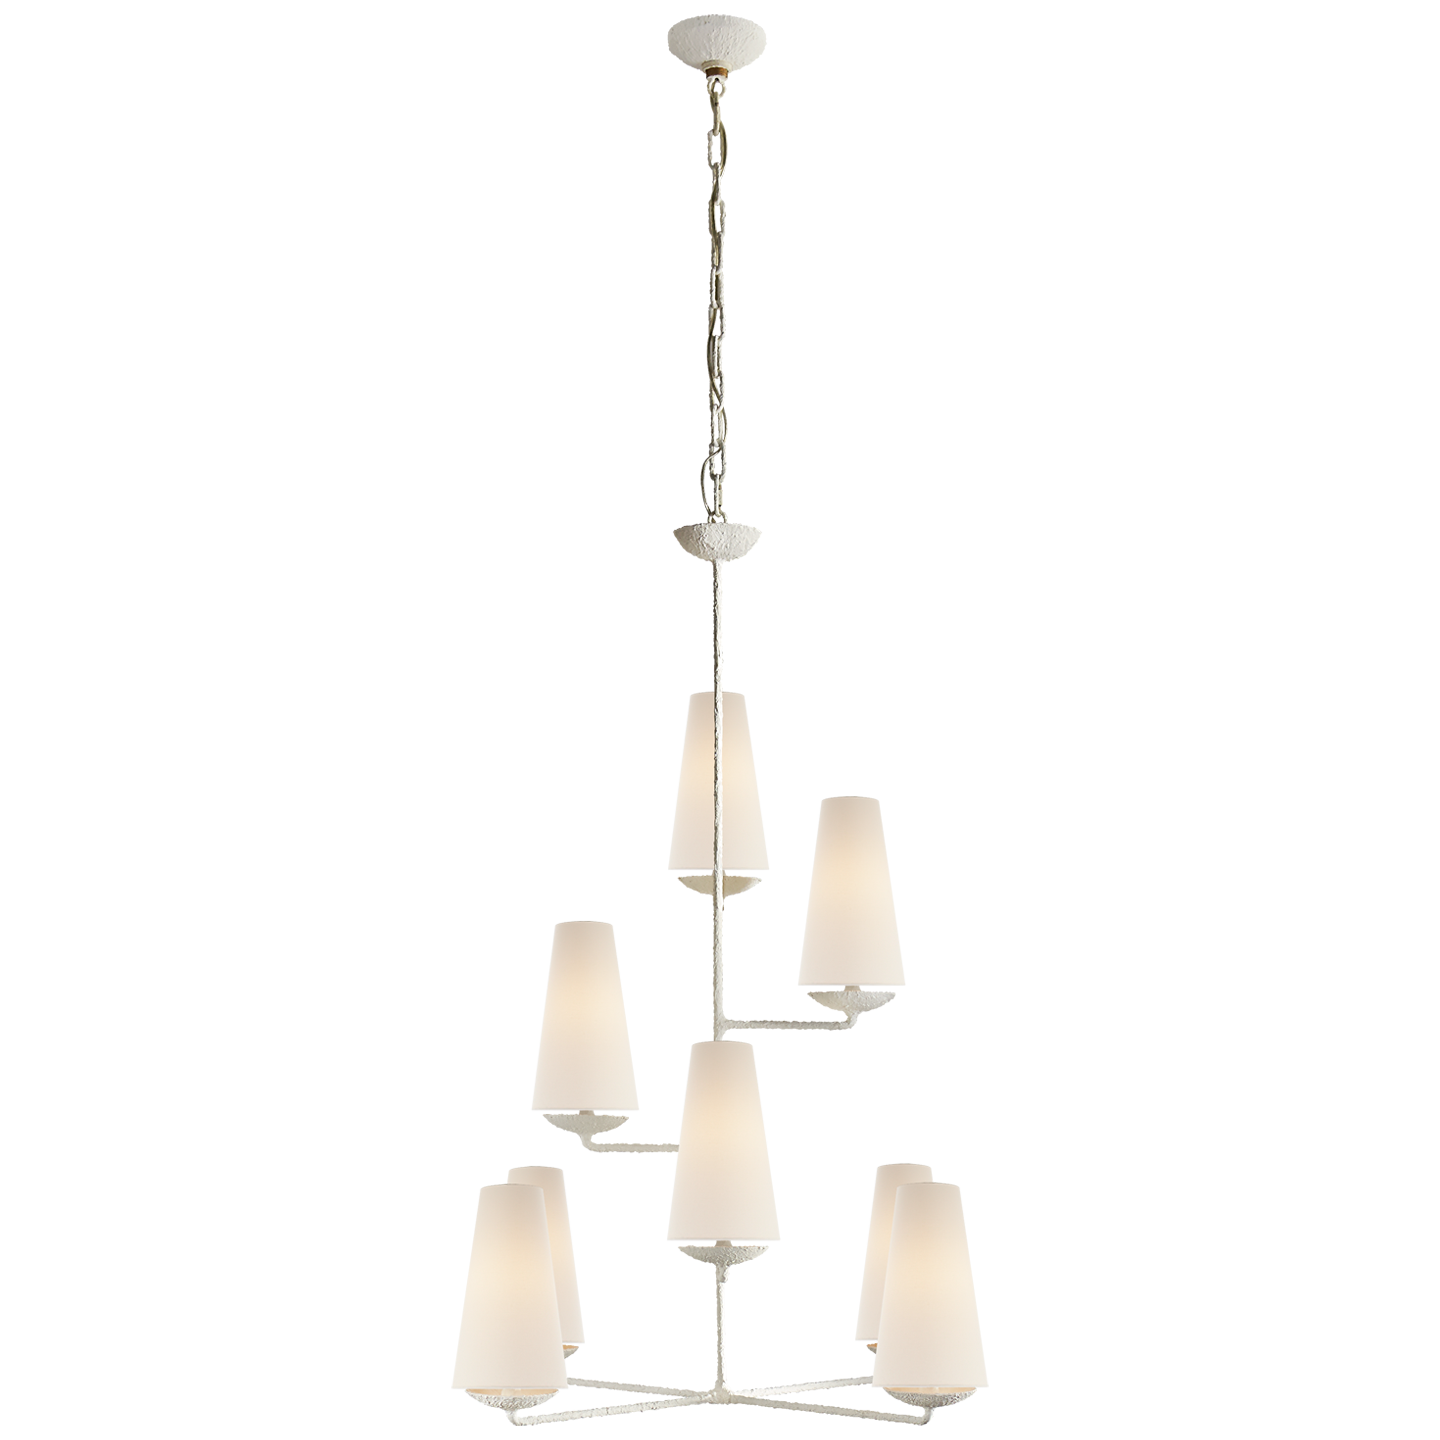 The Fontaine Vertical Chandelier by Visual Comfort has a classy, layered look. The linen shades brings a warm light to any living room, dining room, or other large area  Designer: AERIN